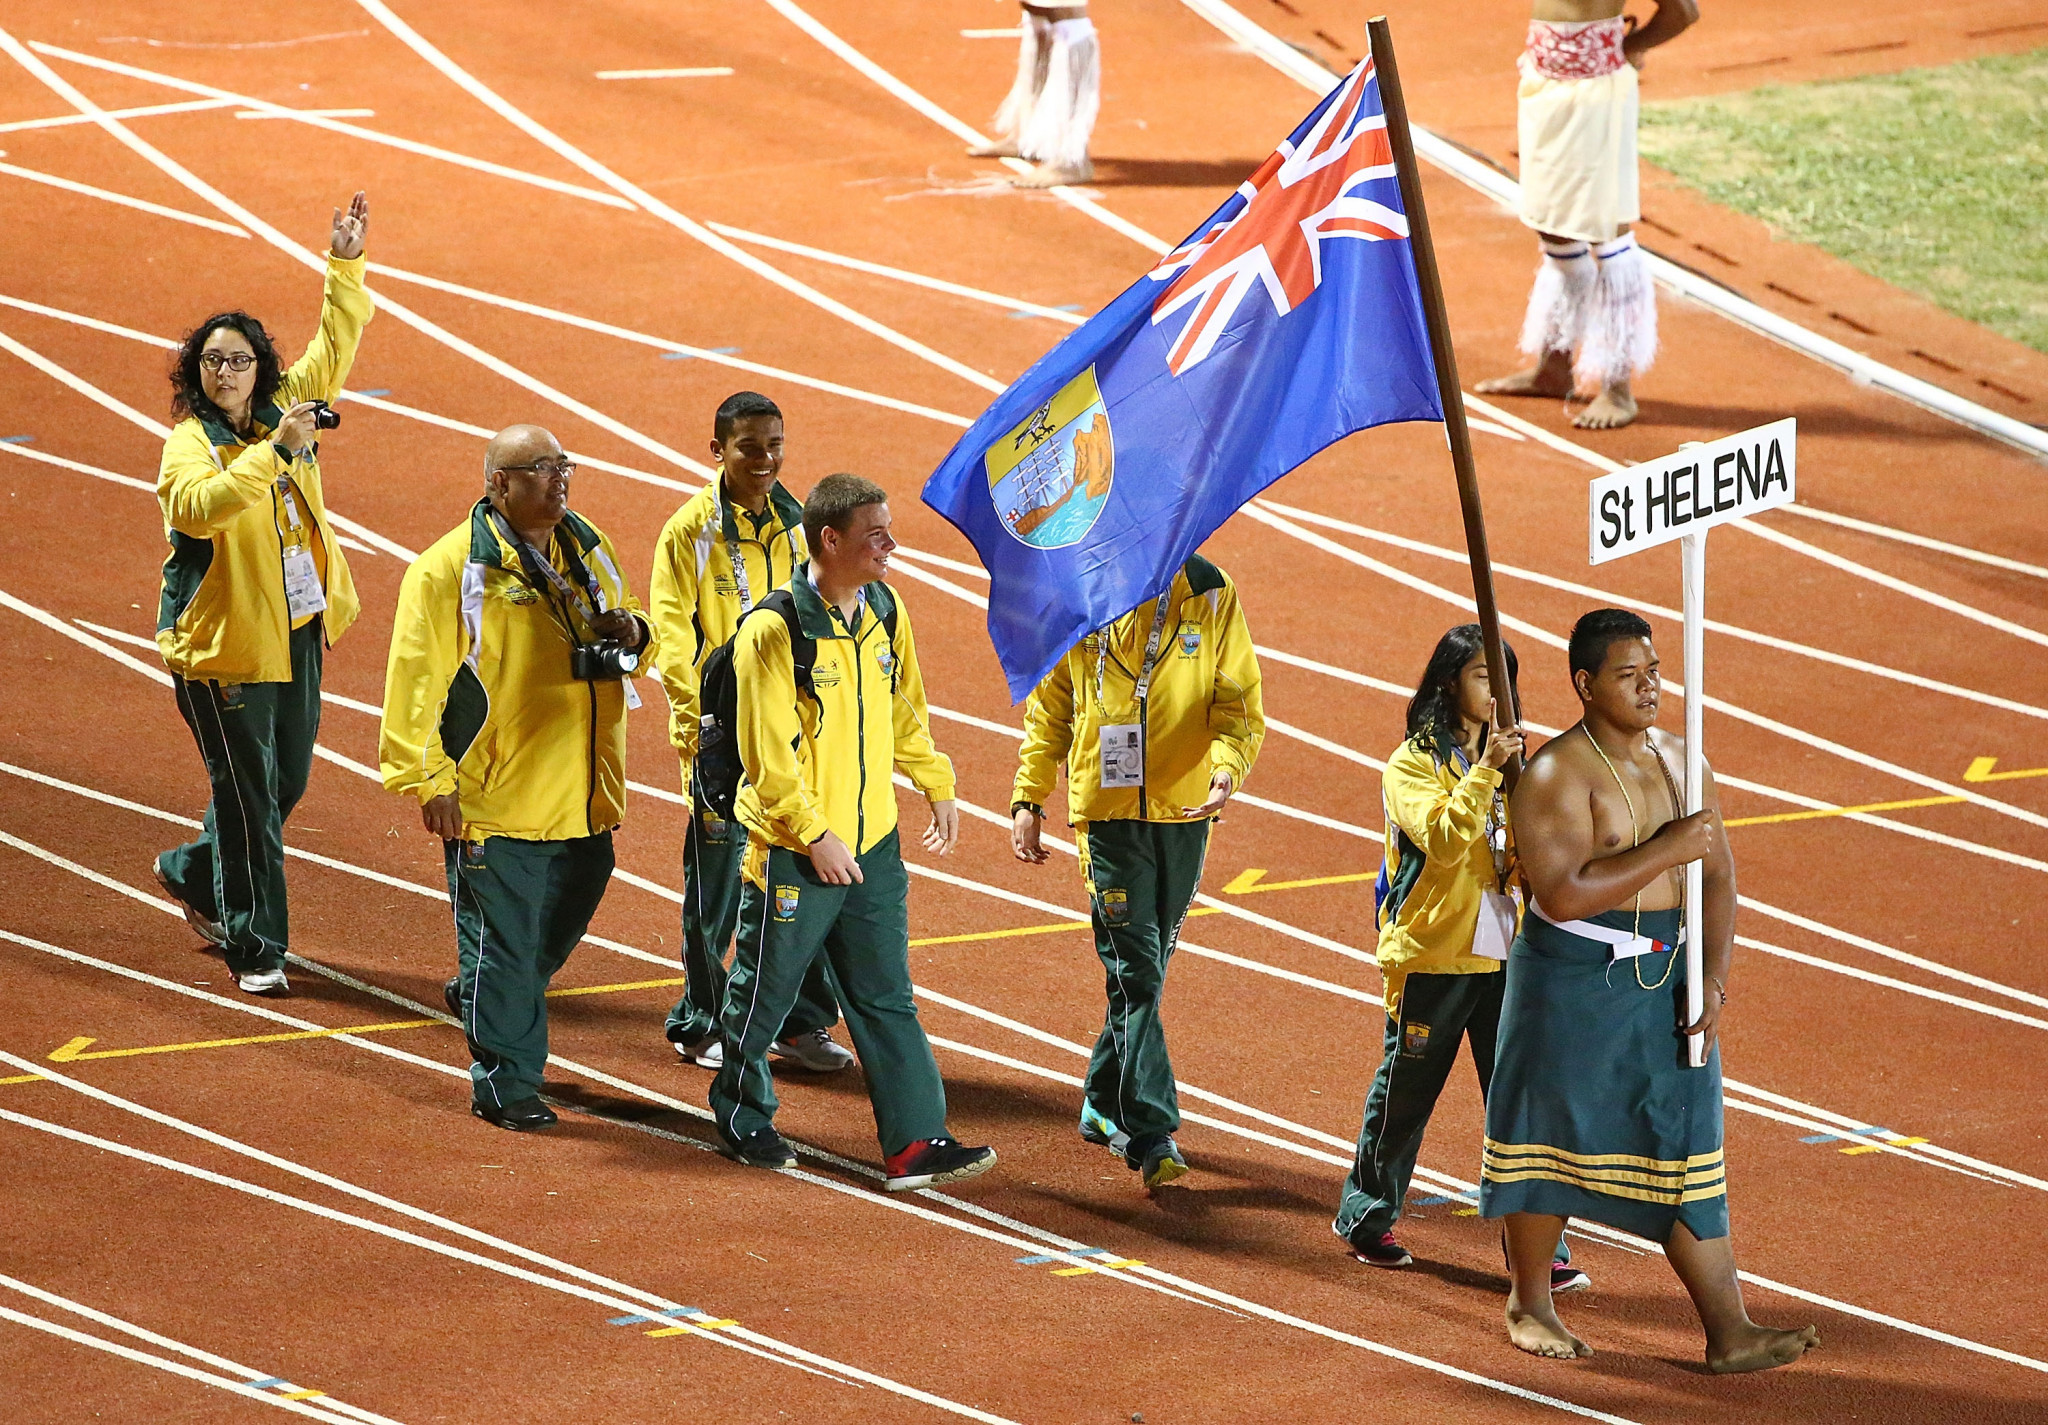 St Helena athletes at the 2015 Commonwealth Youth Games in Samoa ©Getty Images